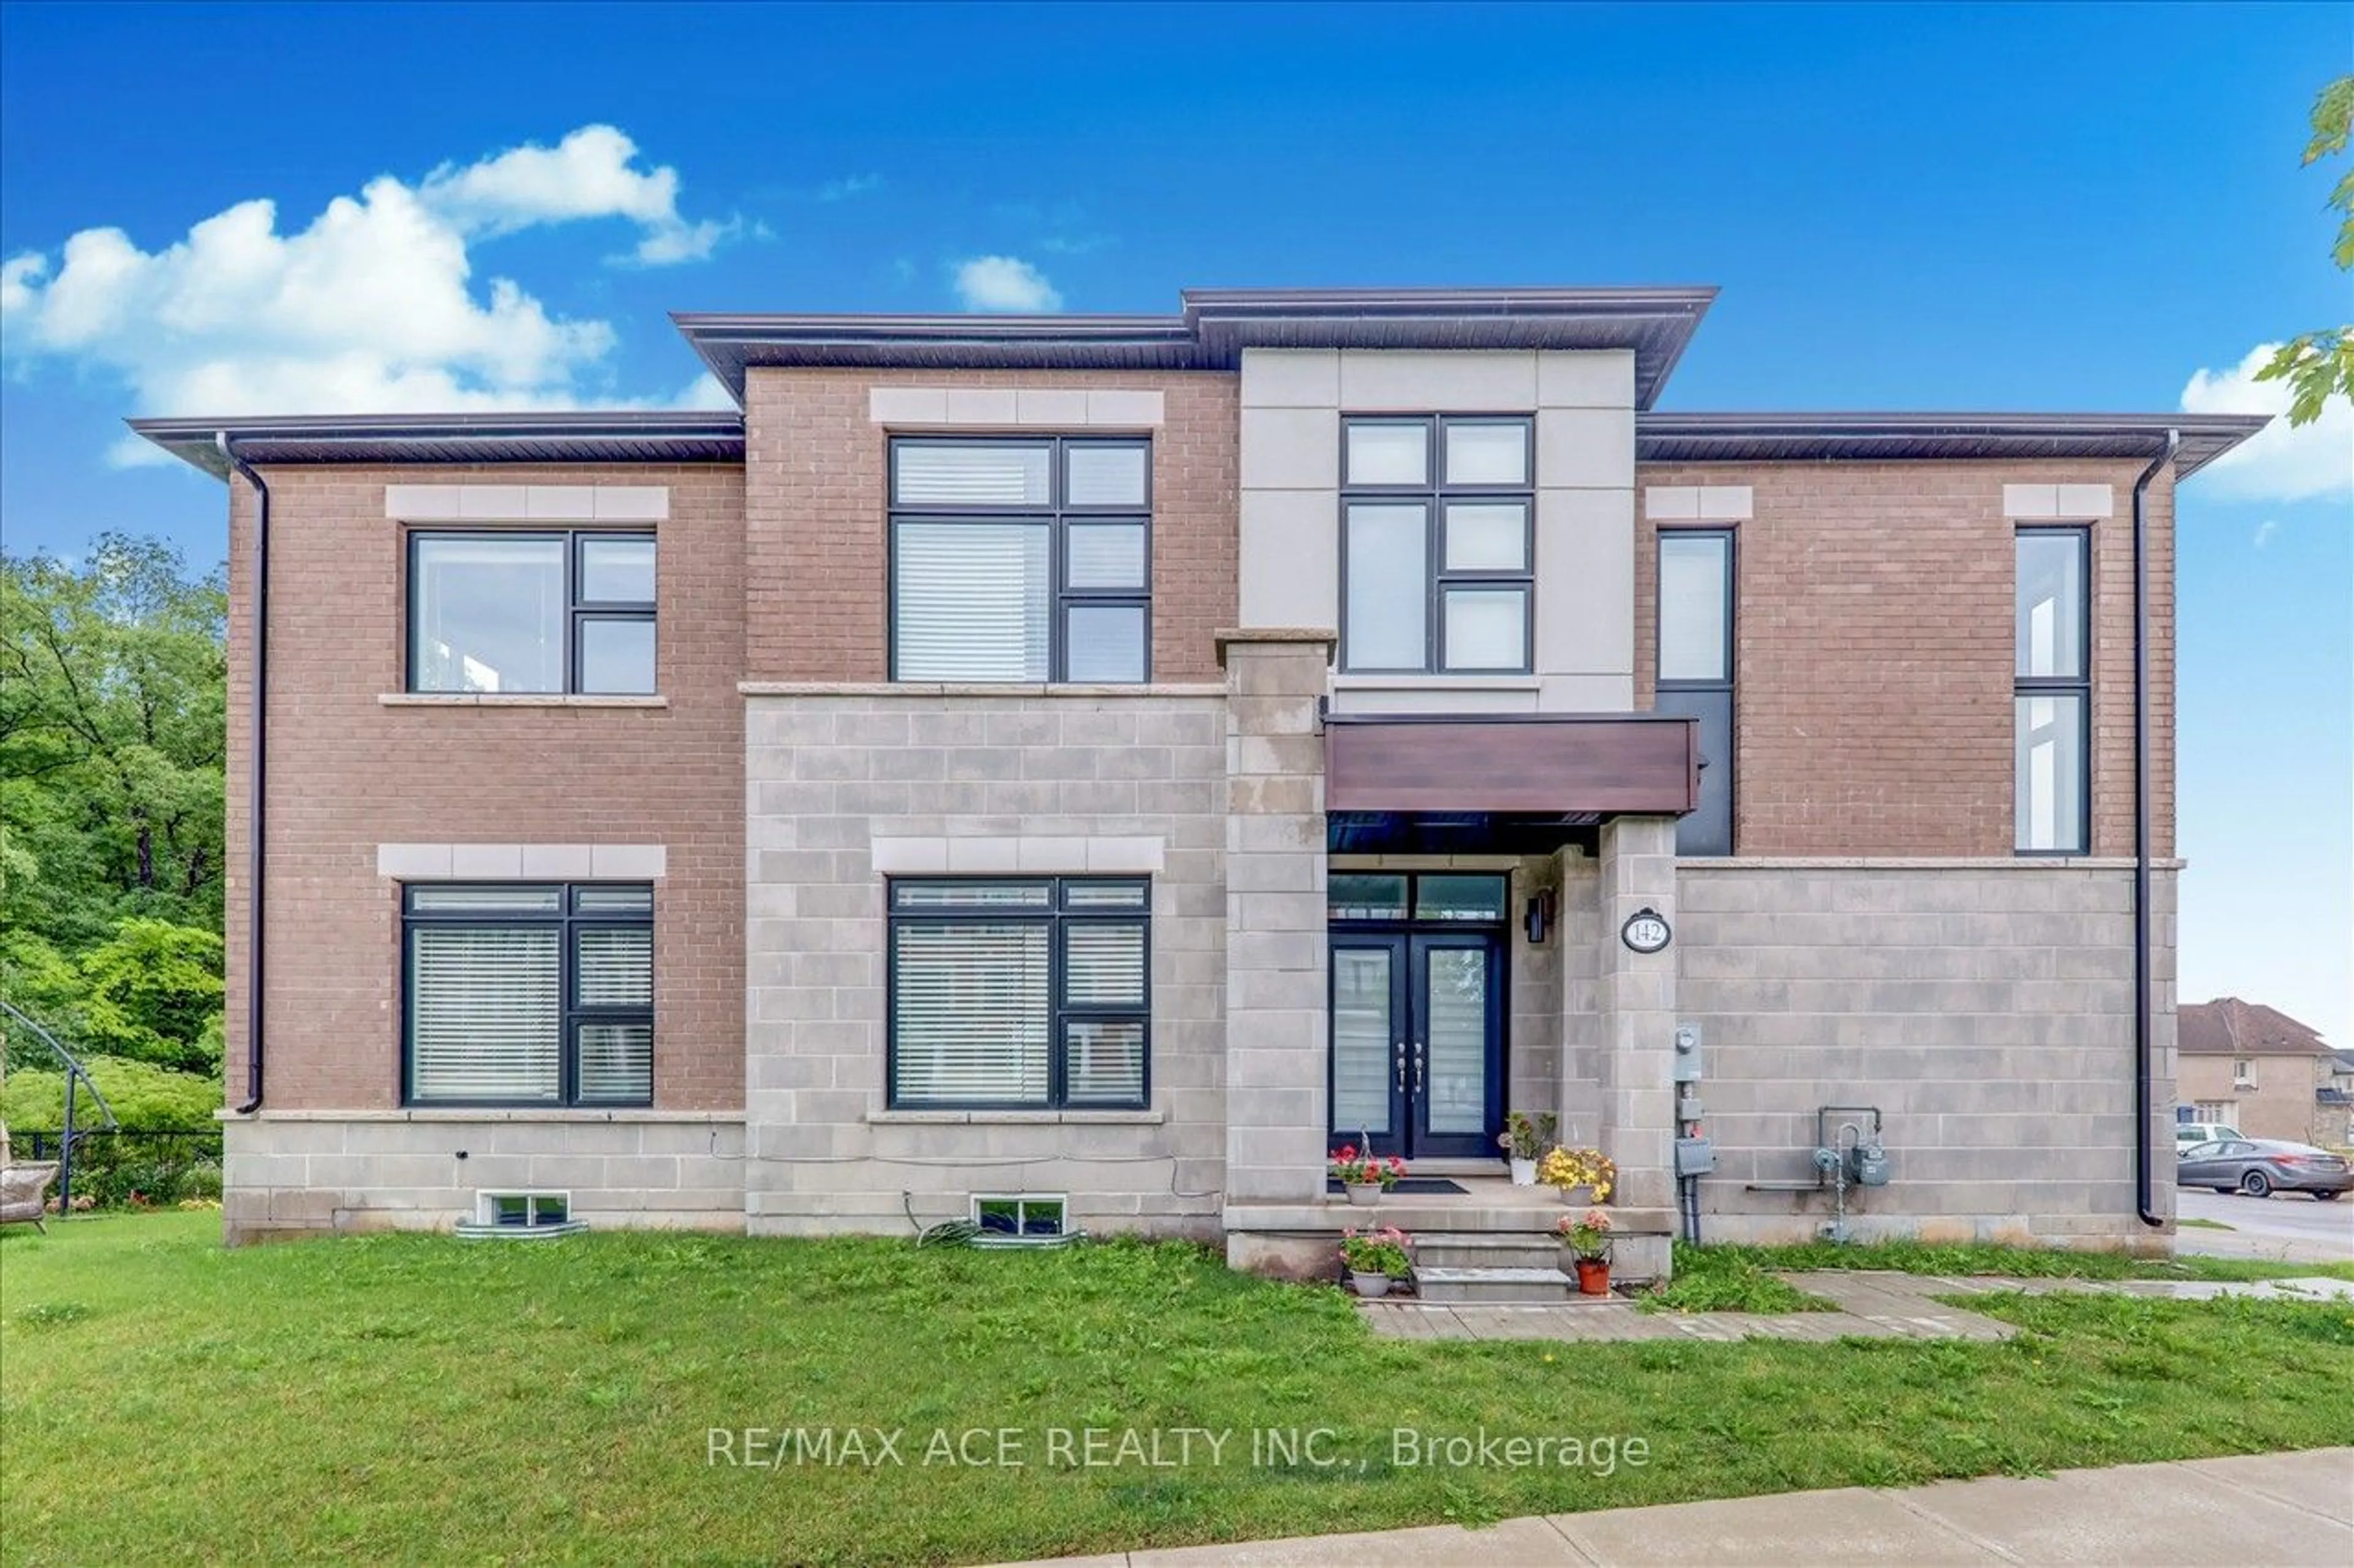 Home with brick exterior material for 142 Settlers Rd, Oakville Ontario L6H 7C8